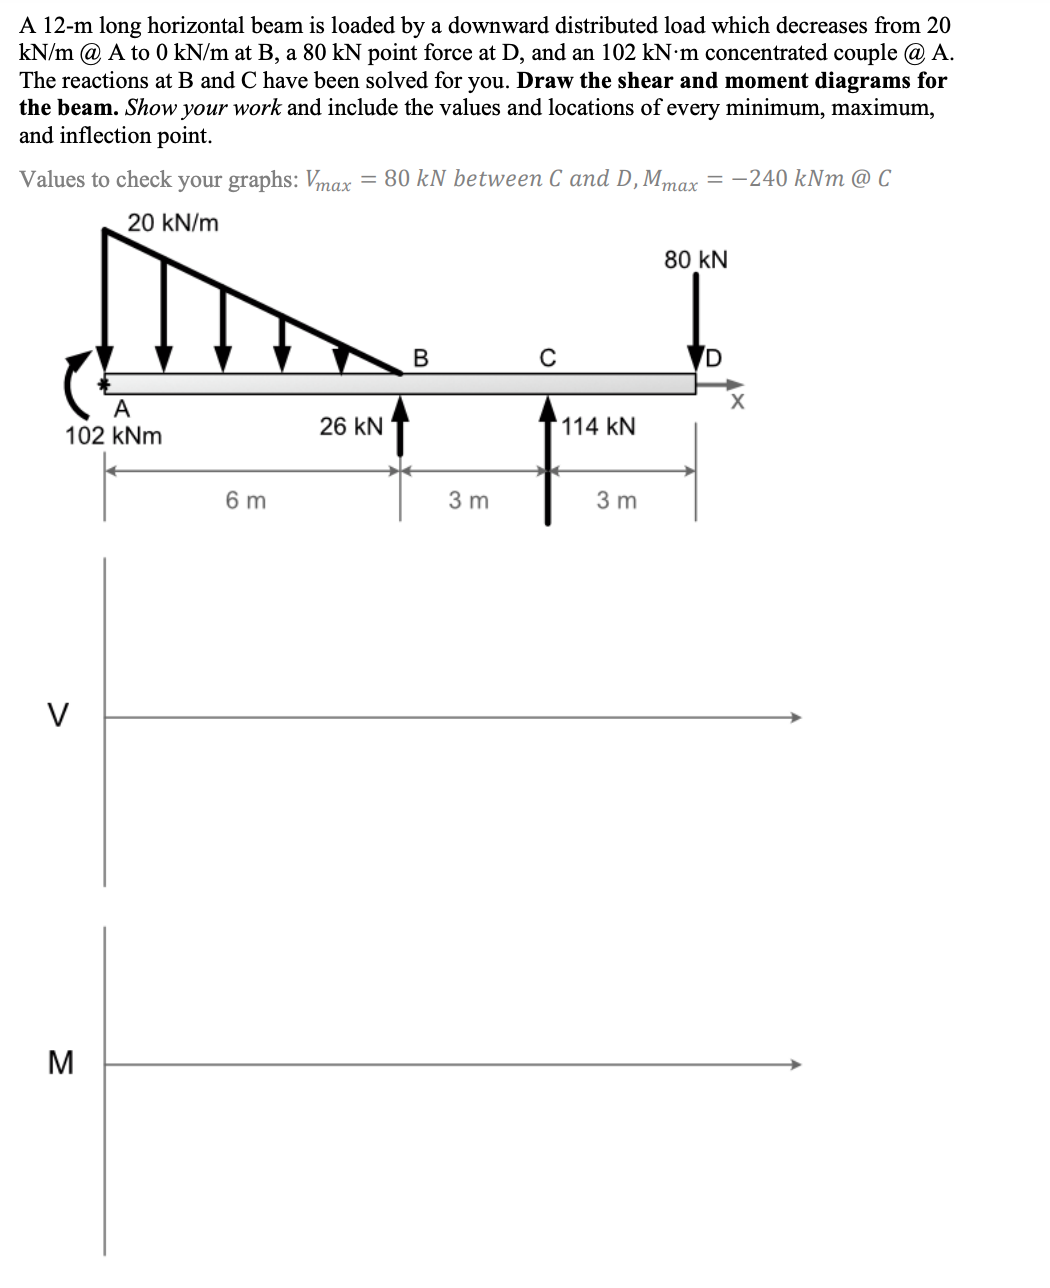 A 12-m long horizontal beam is loaded by a downward distributed load which decreases from 20
kN/m @ A to 0 kN/m at B, a 80 kN point force at D, and an 102 kN·m concentrated couple @ A.
The reactions at B and C have been solved for you. Draw the shear and moment diagrams for
the beam. Show your work and include the values and locations of every minimum, maximum,
and inflection point.
Values to check your graphs: Vmax = 80 kN between C and D, Mmax = -240 kNm @ C
20 kN/m
A
102 kNm
6 m
>
M
26 KN
B
C
114 KN
3 m
3 m
80 kN